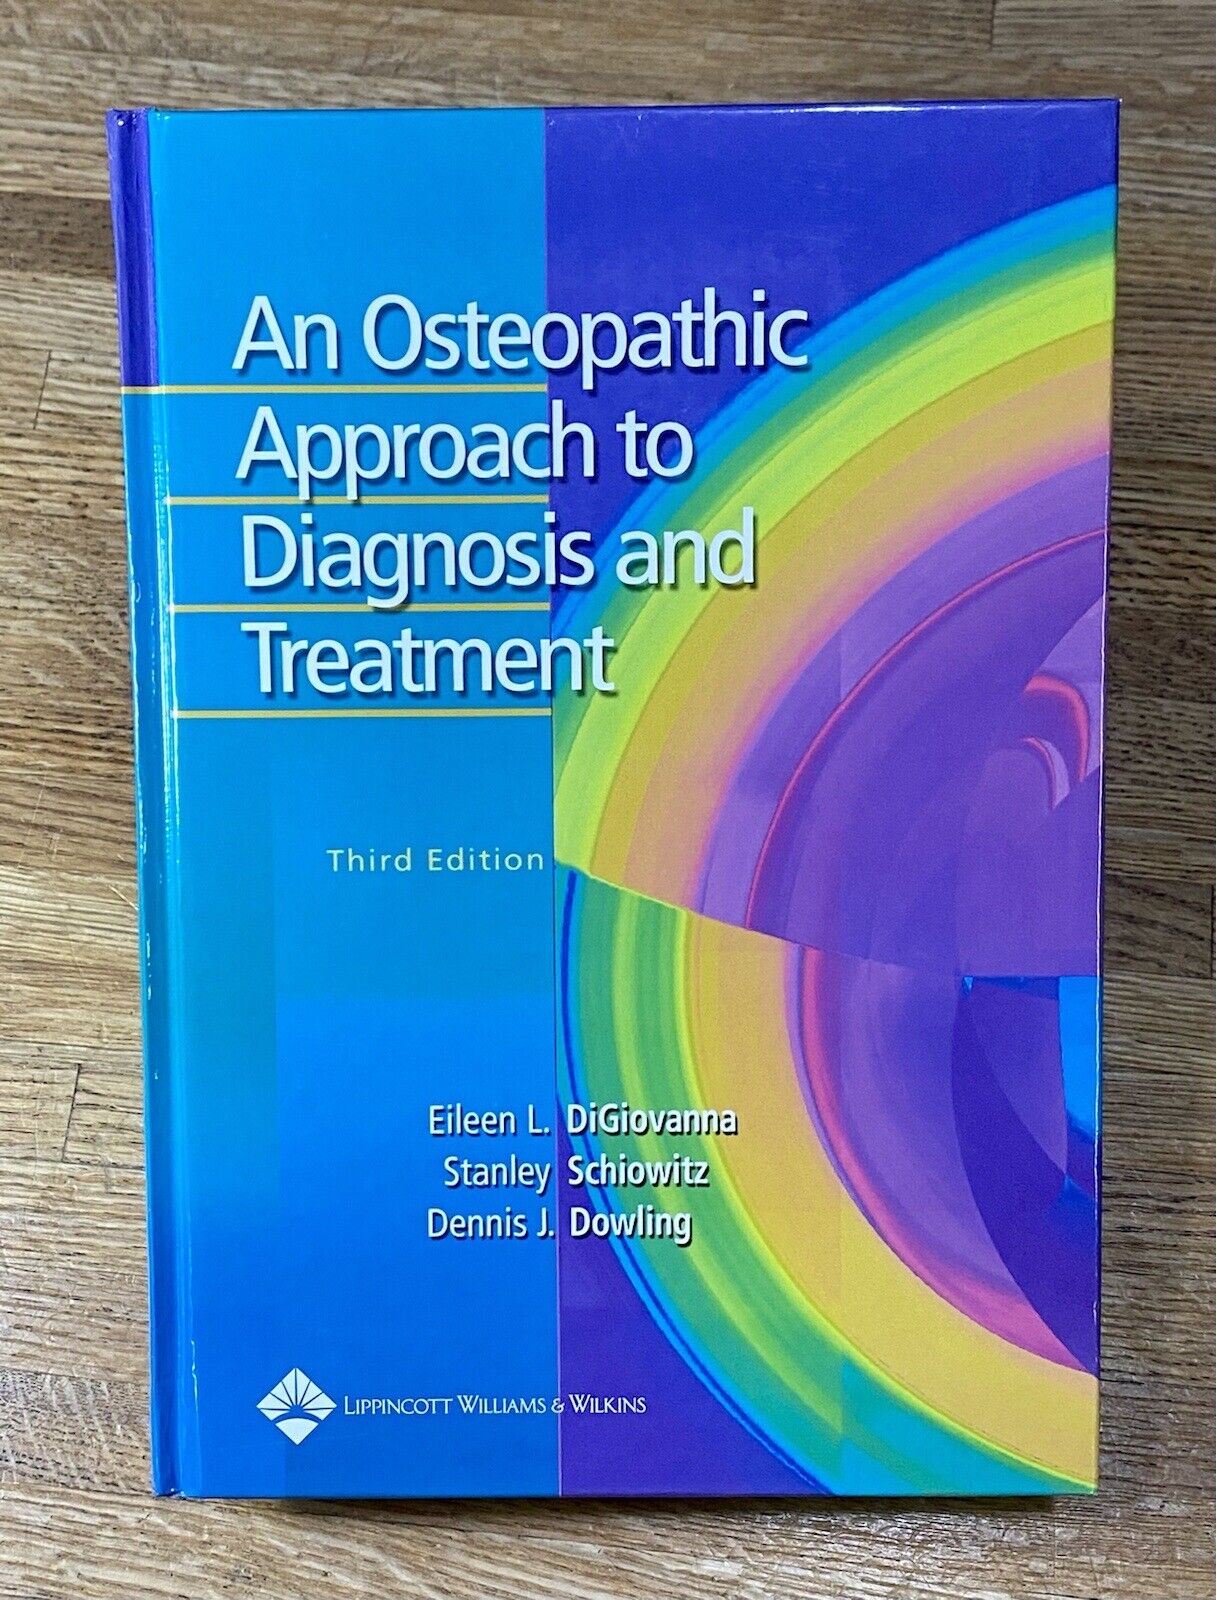 An Osteopathic Approach to Diagnosis and Treatment, 3rd Ed, Hardcover